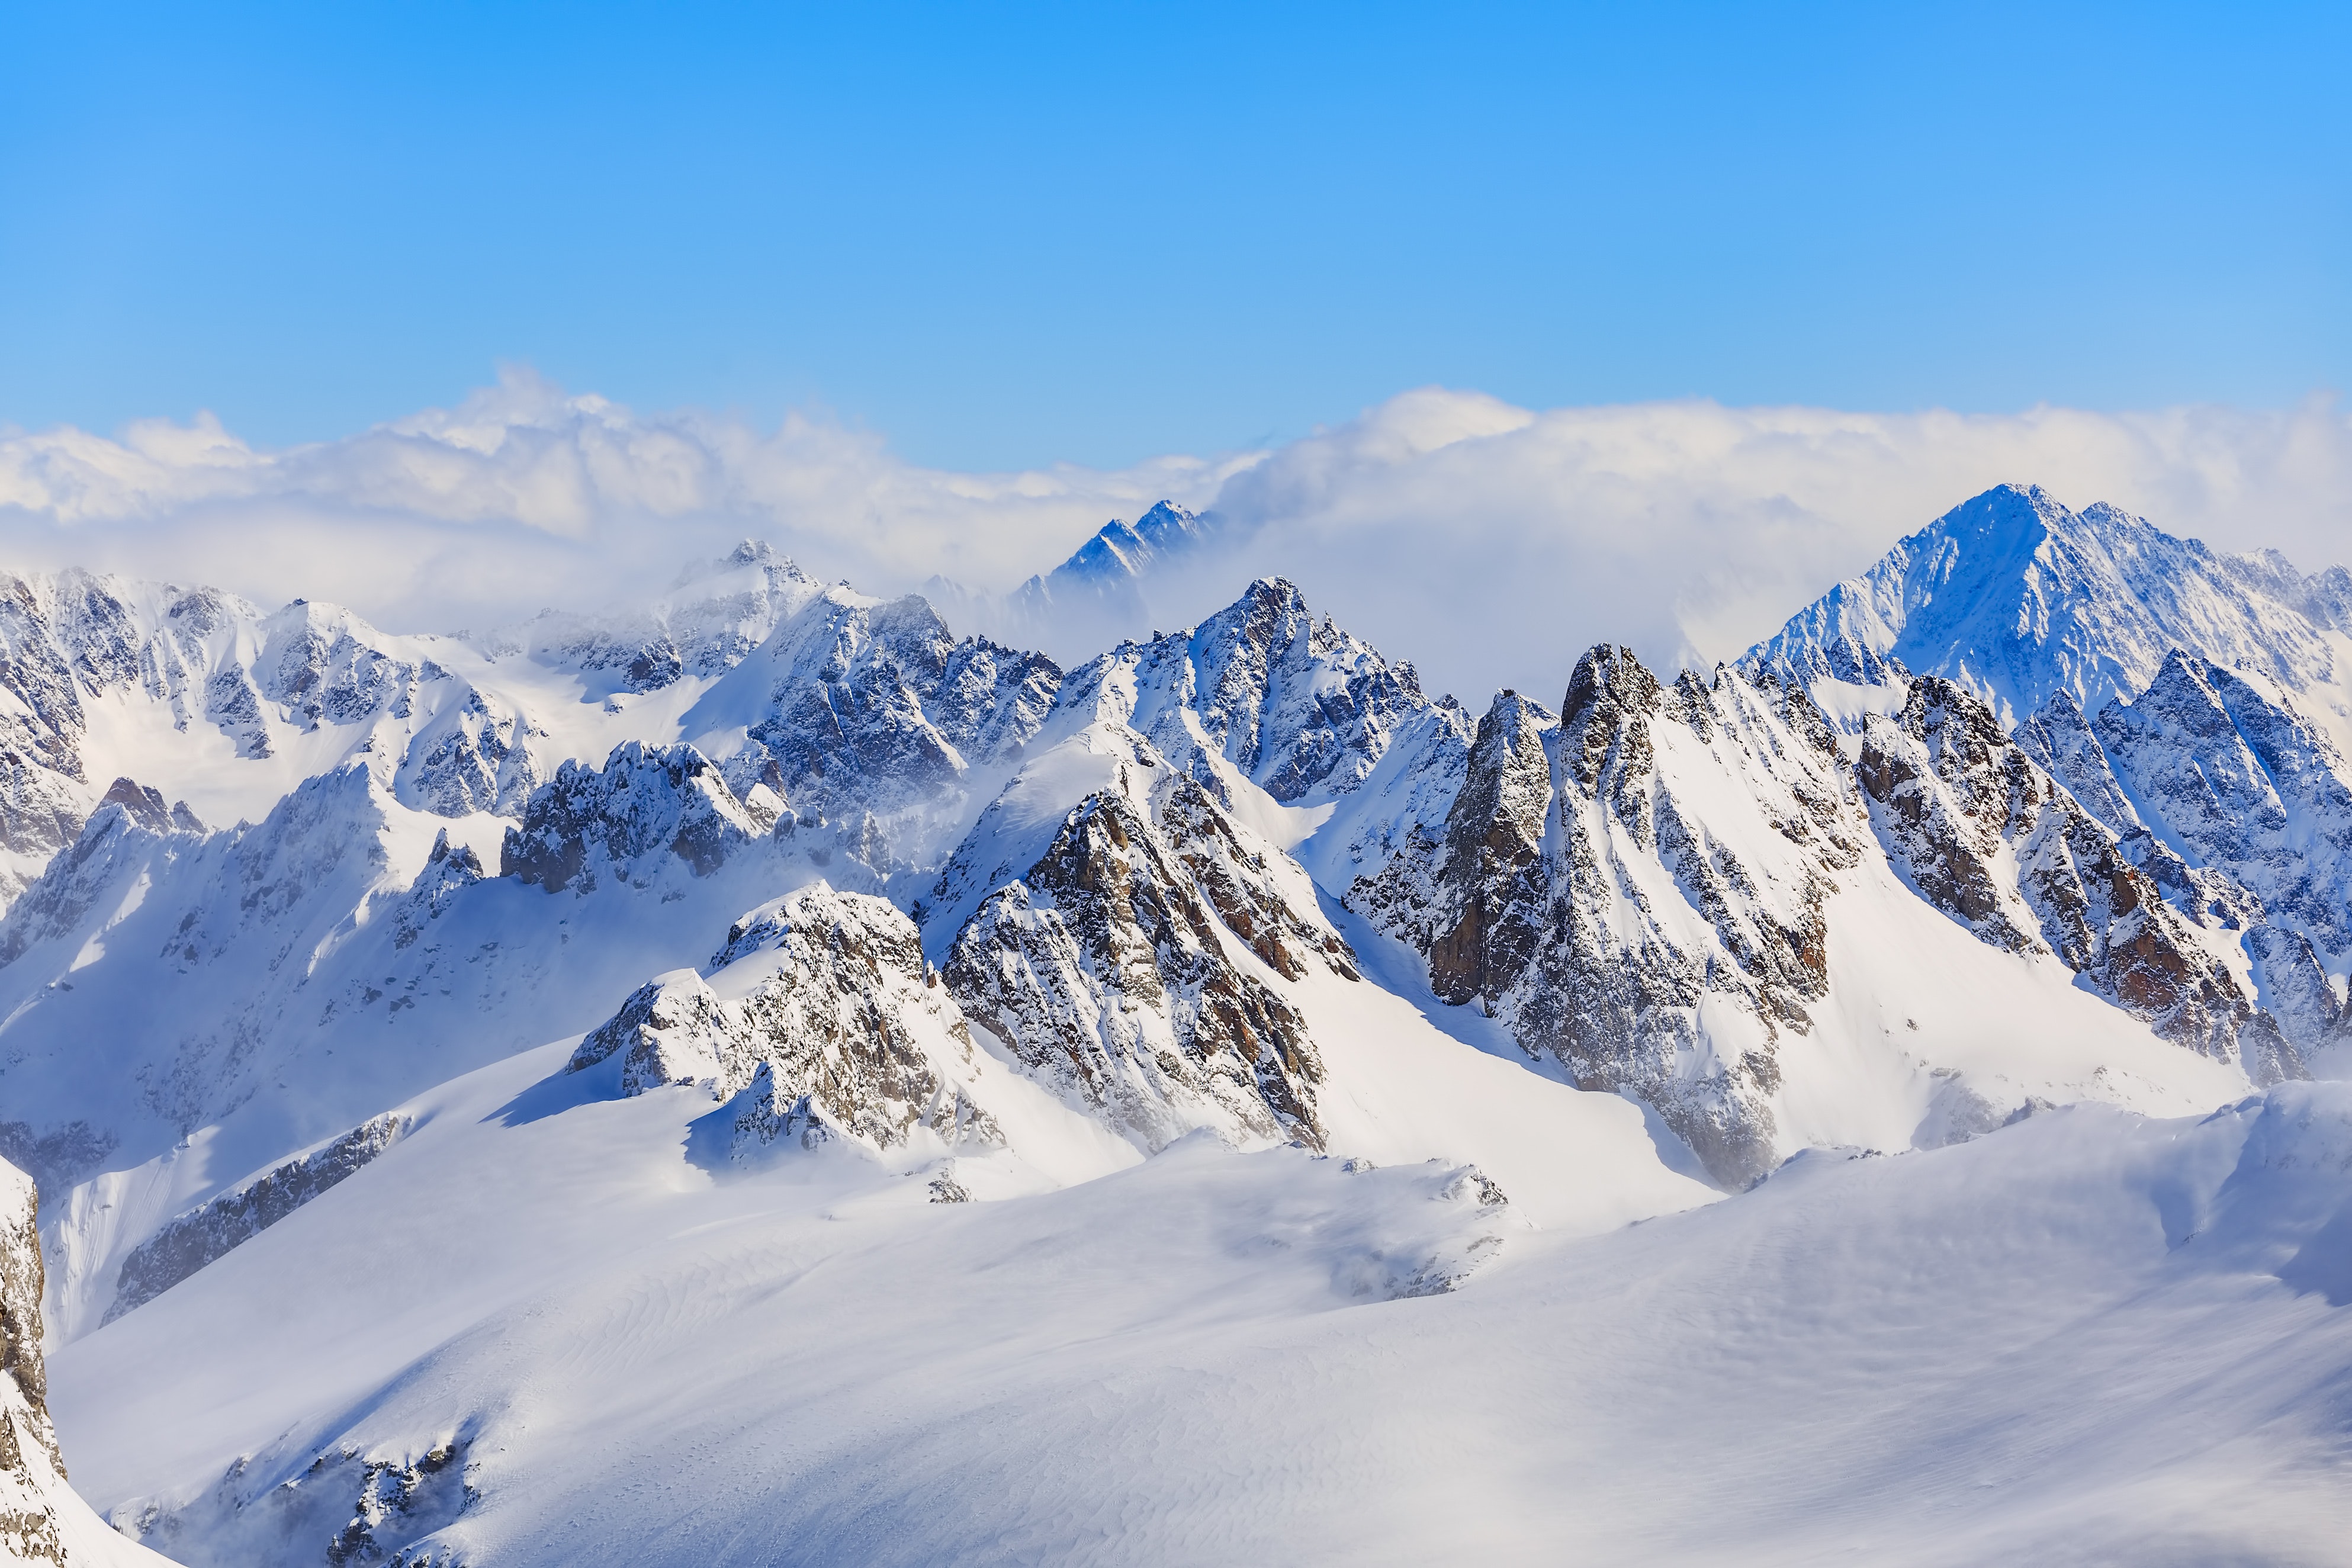 Mountain Ranges Covered in Snow, Adventure, Slope, Pinnacle, Resort, HQ Photo